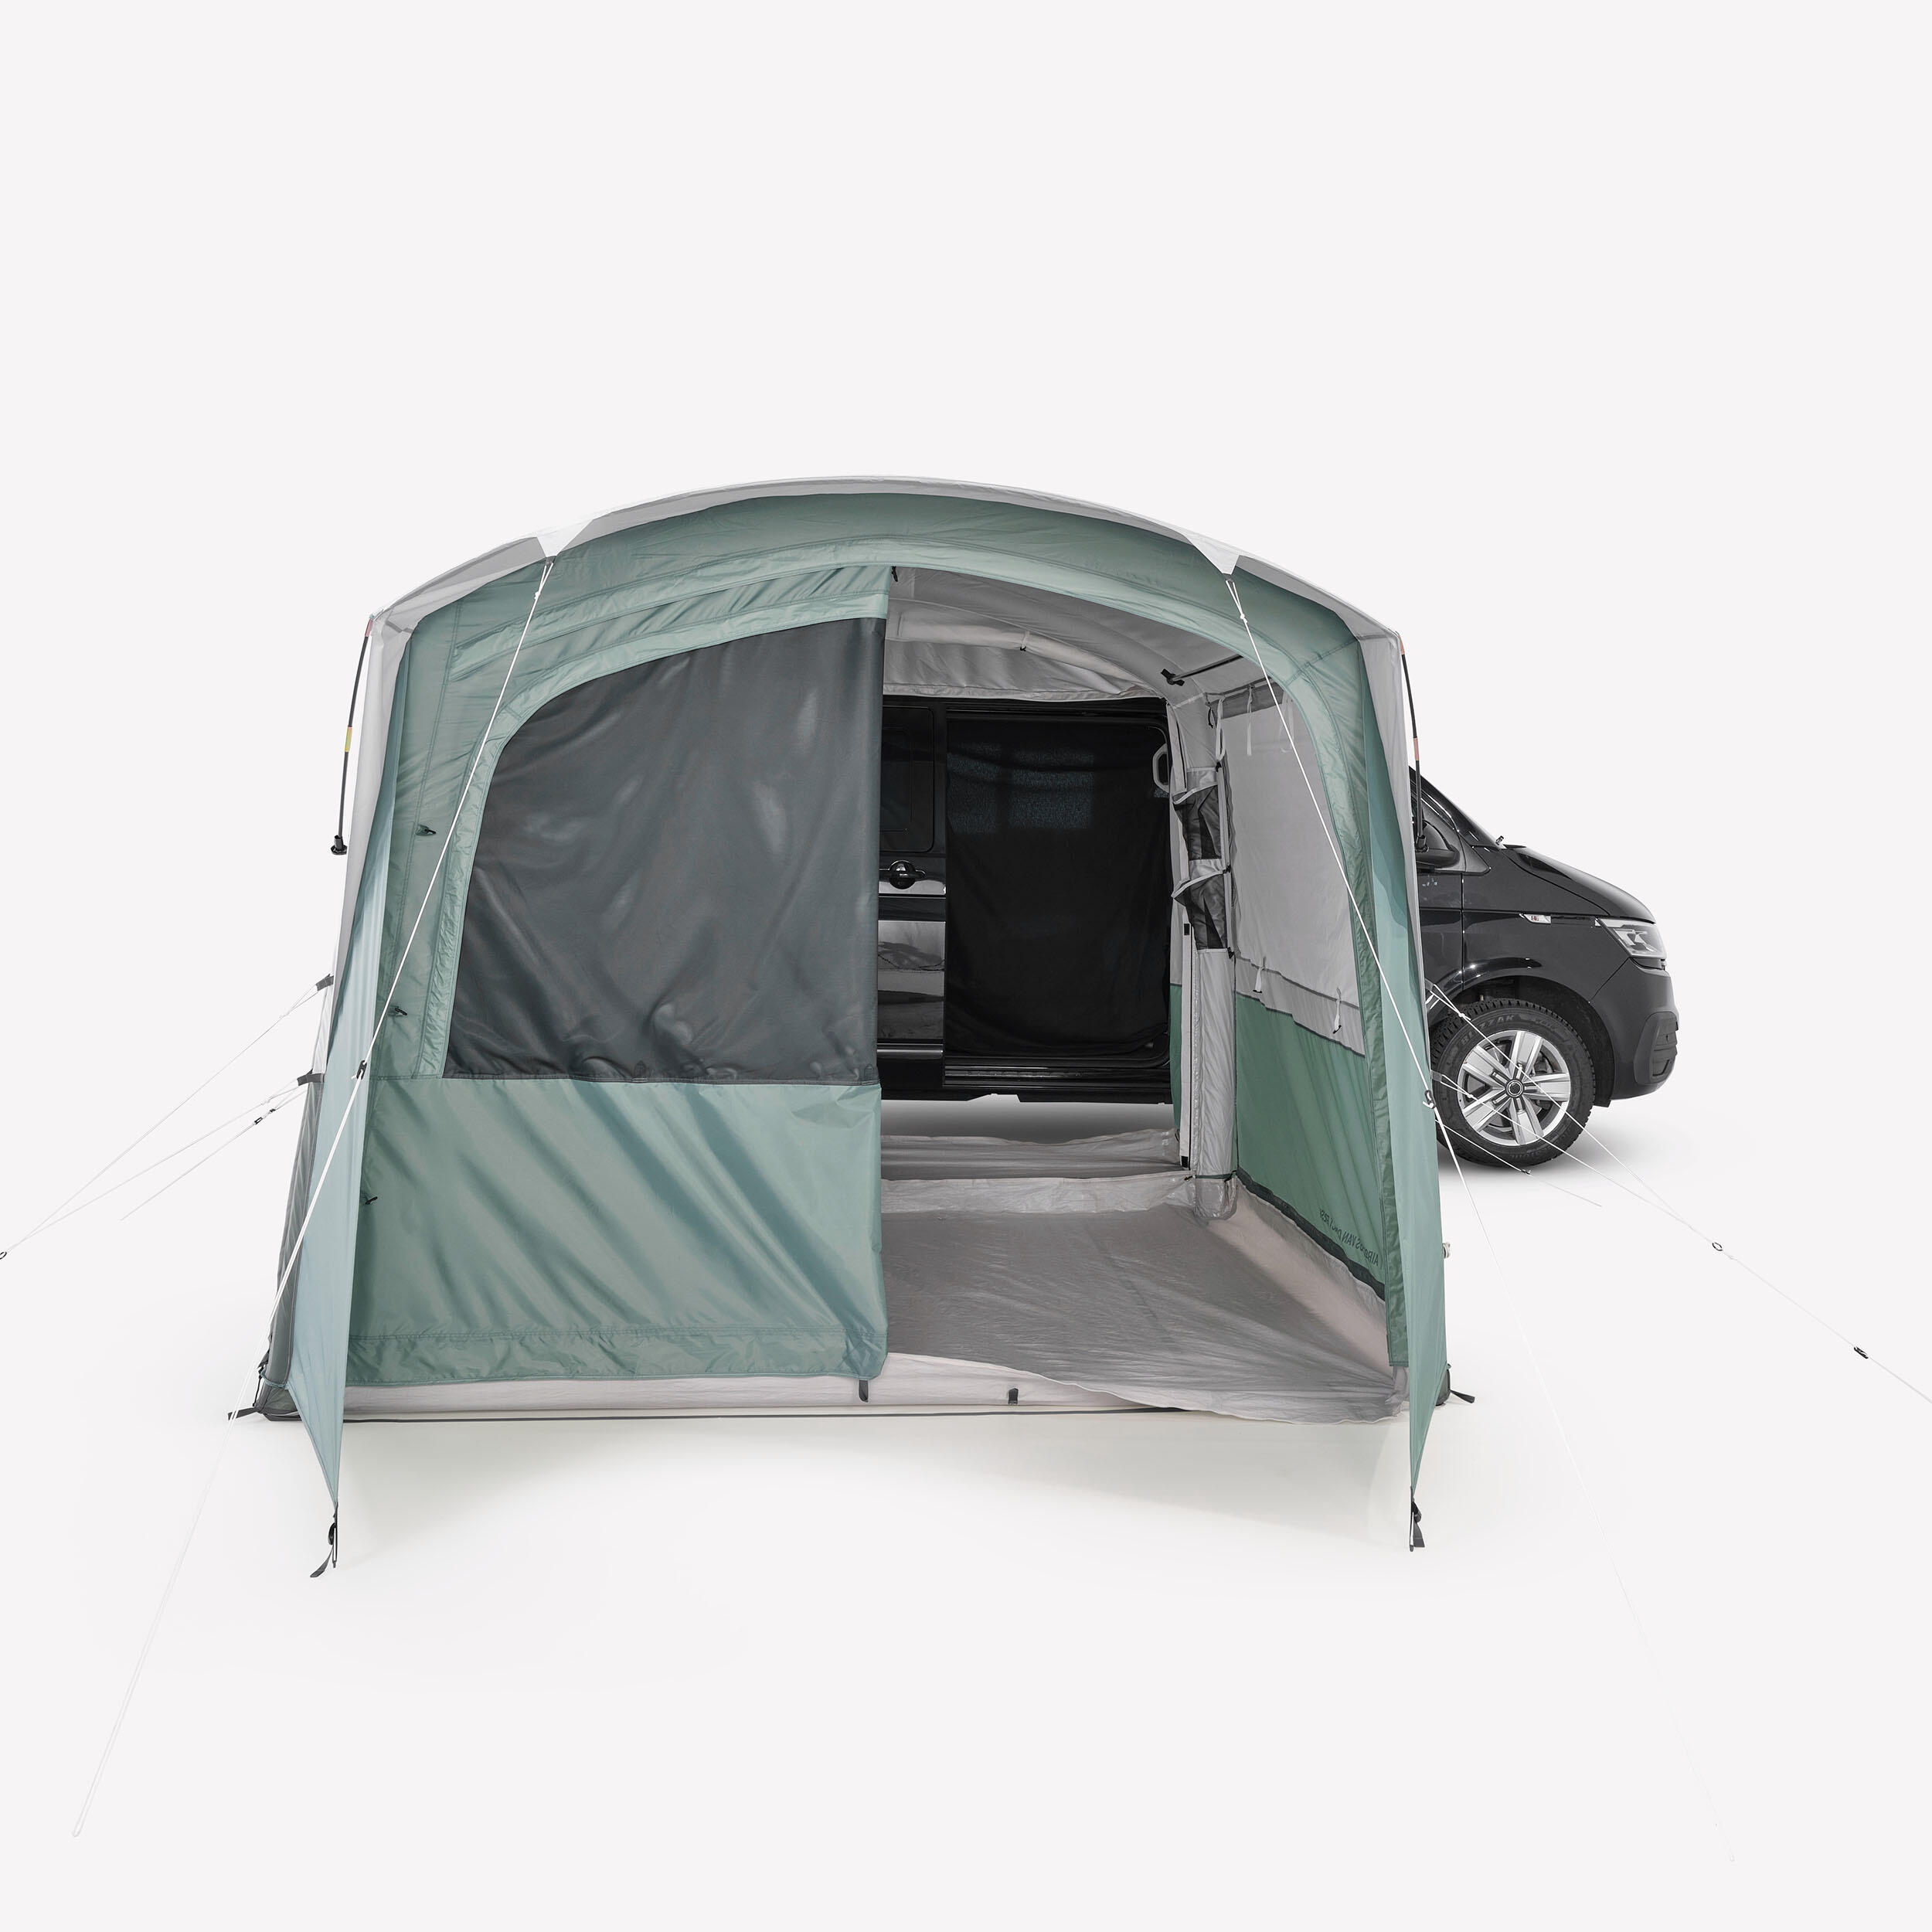 Van and truck inflatable canopy - Van Connect Air Seconds Fresh - 6 people 8/15